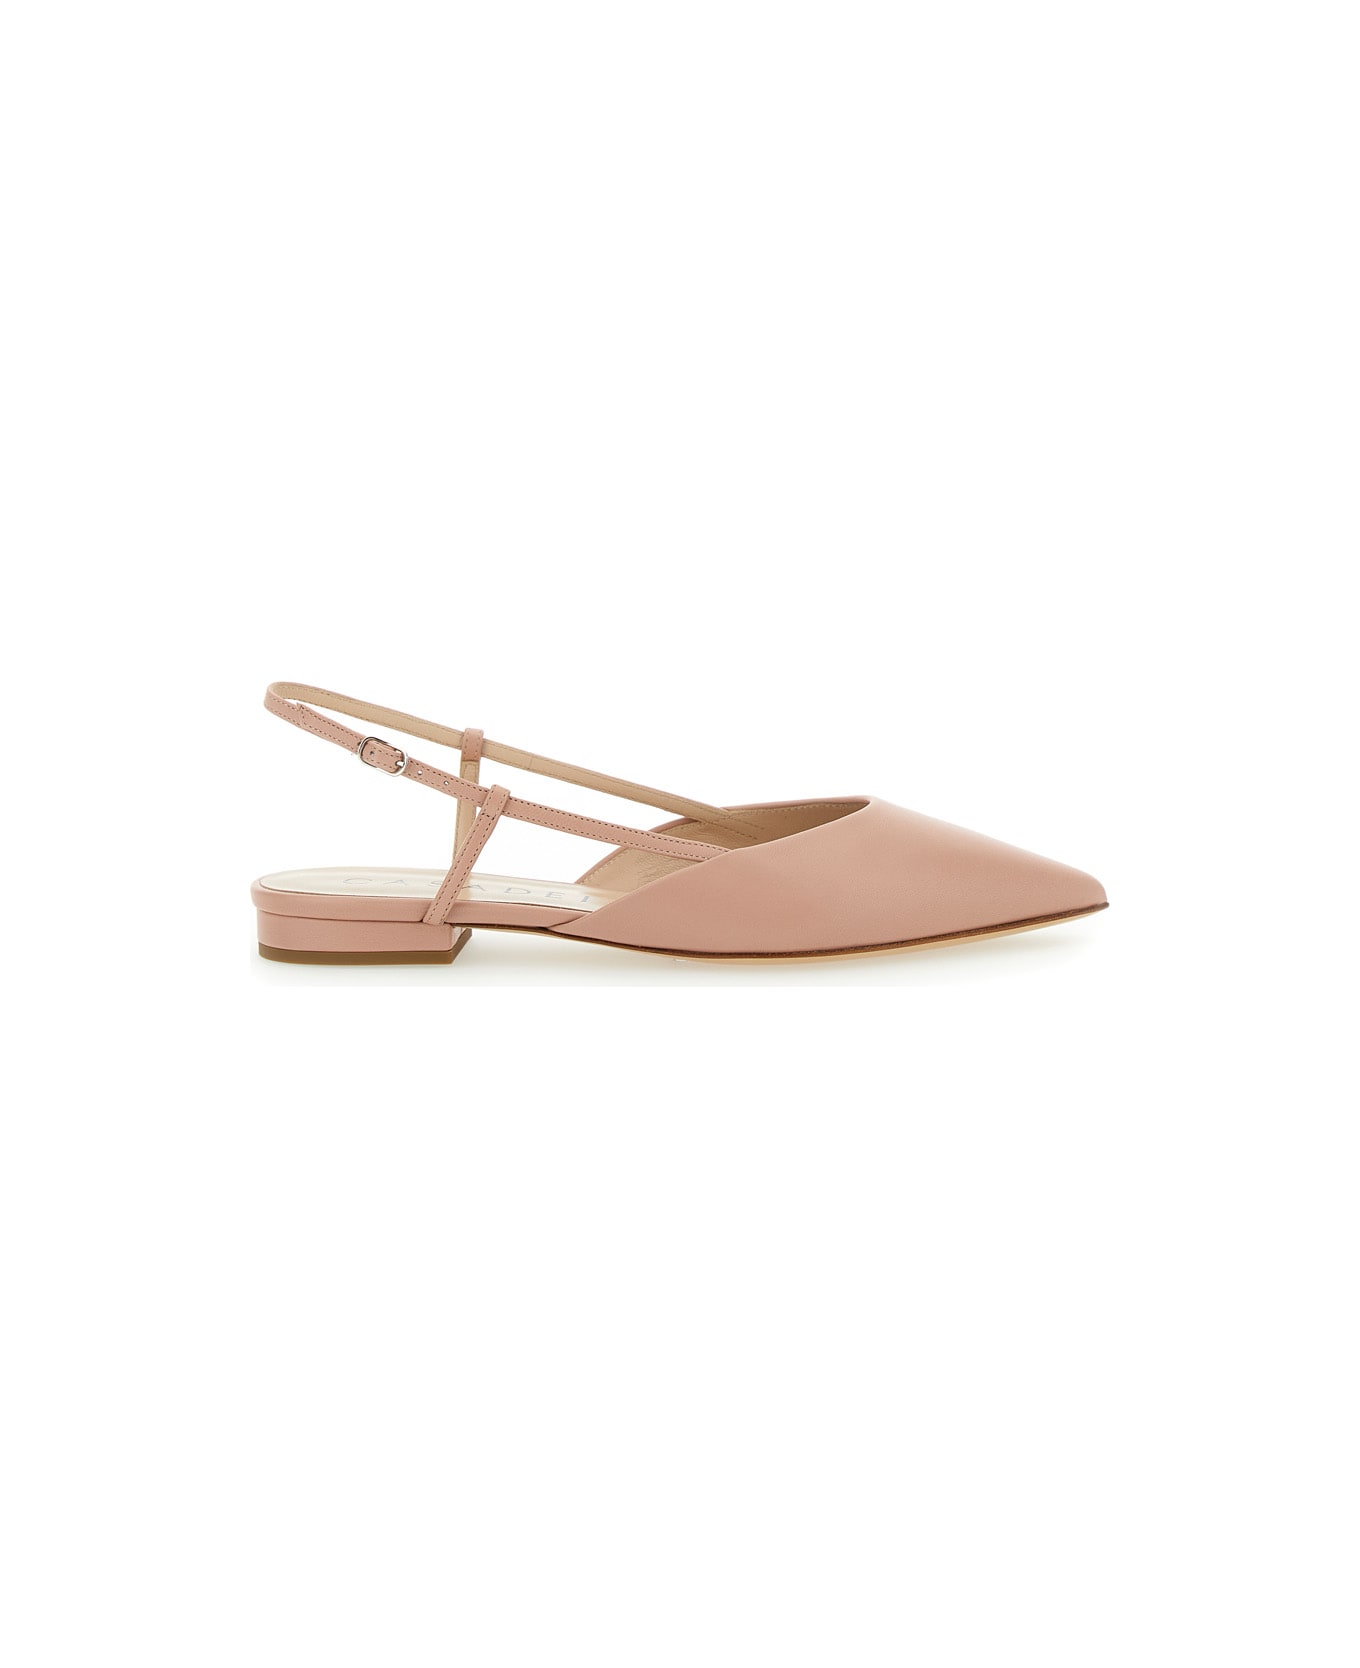 Casadei Pink Slingback With Straps In Leather Woman - Pink フラットシューズ